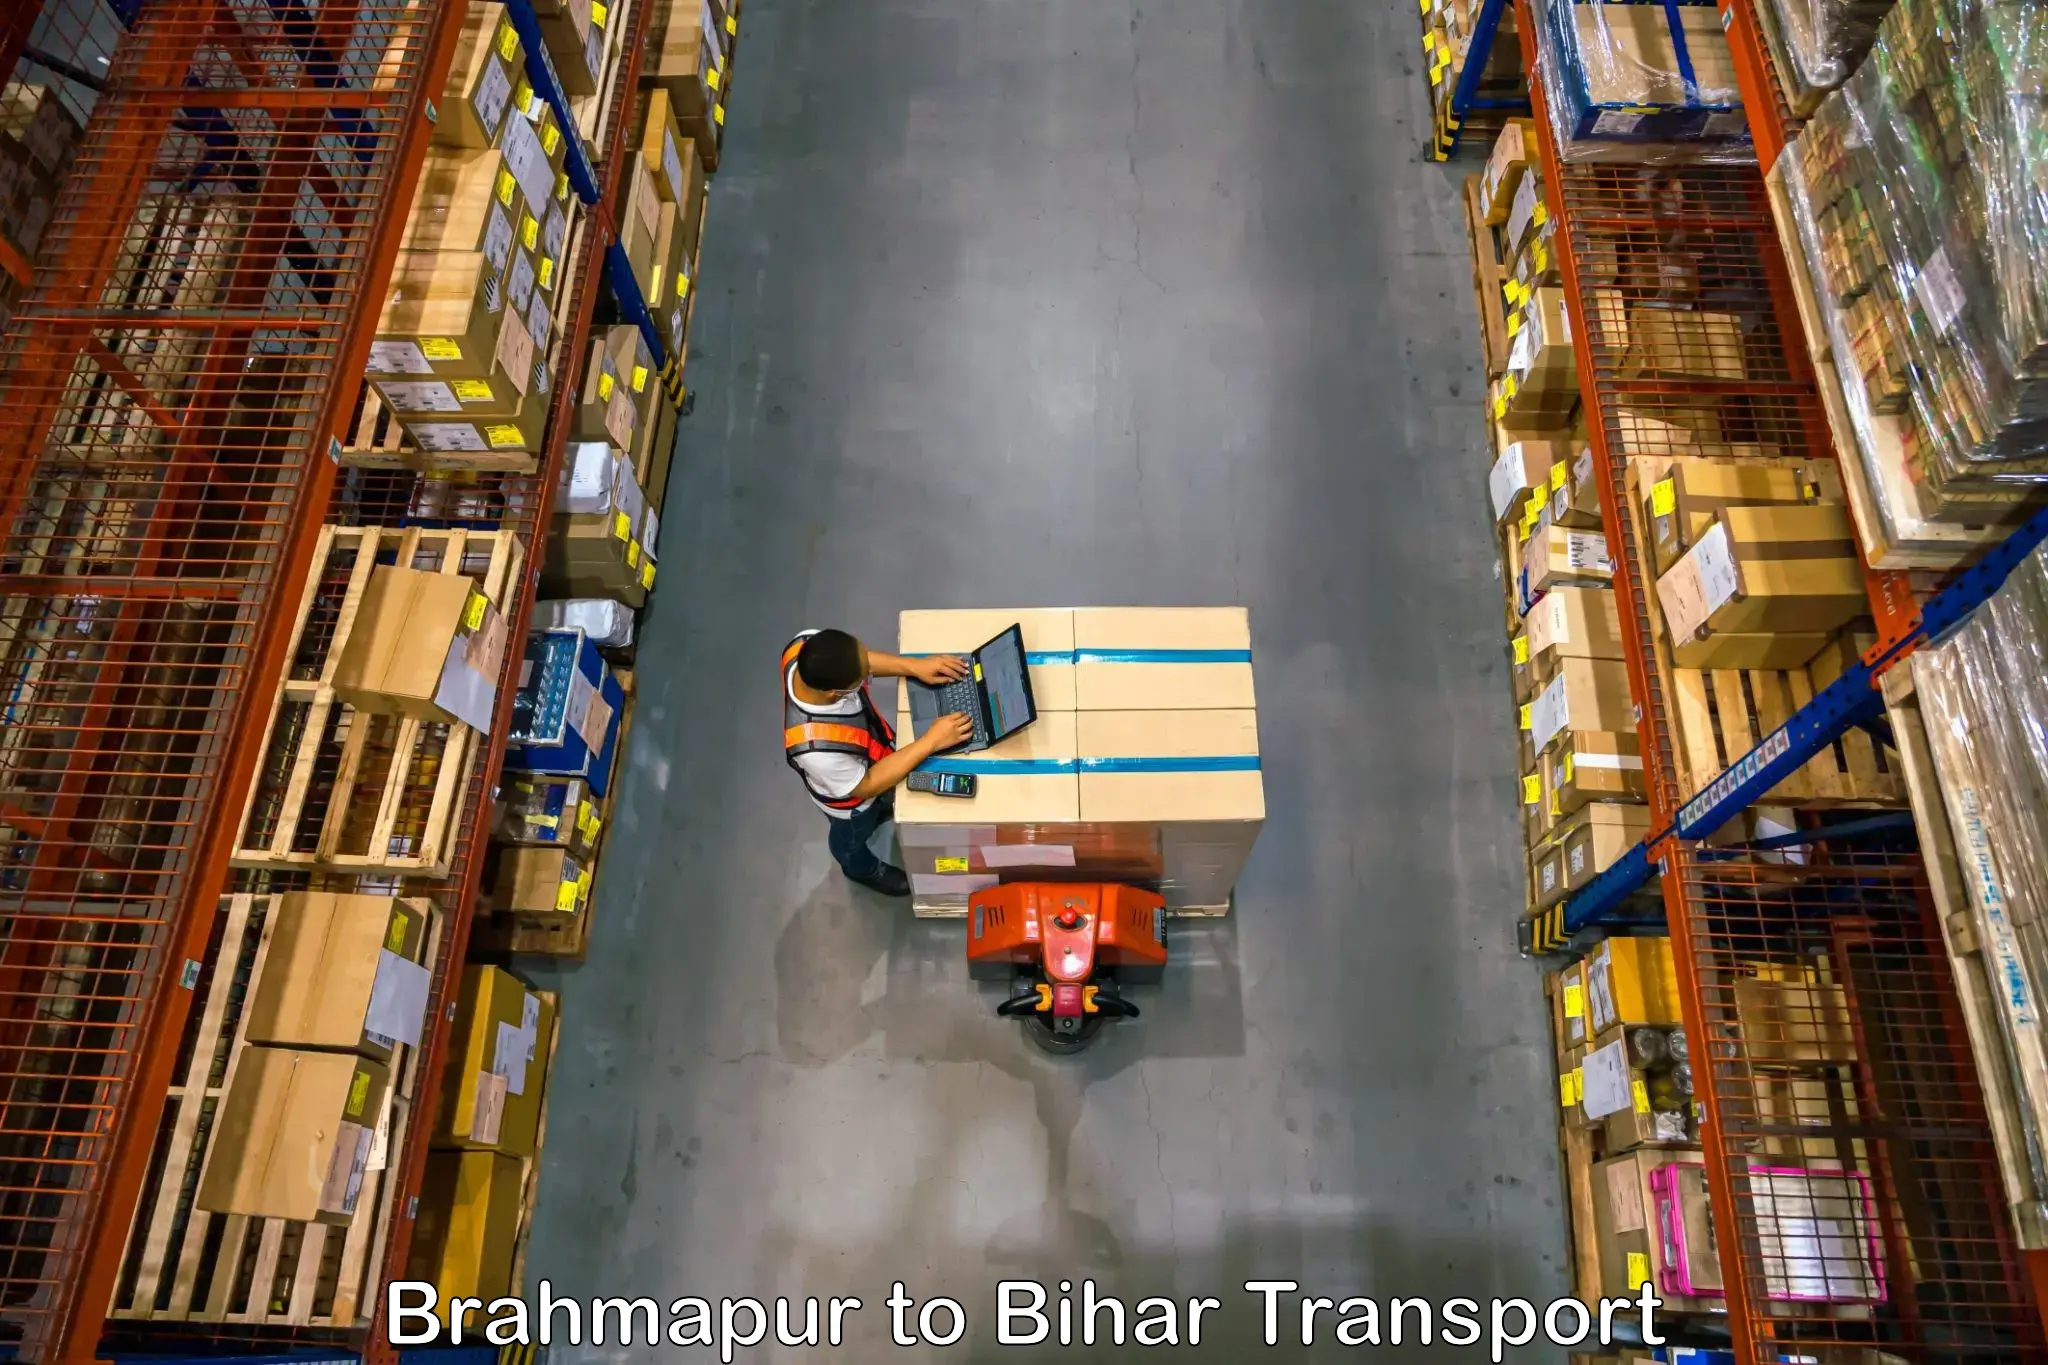 Truck transport companies in India in Brahmapur to East Champaran